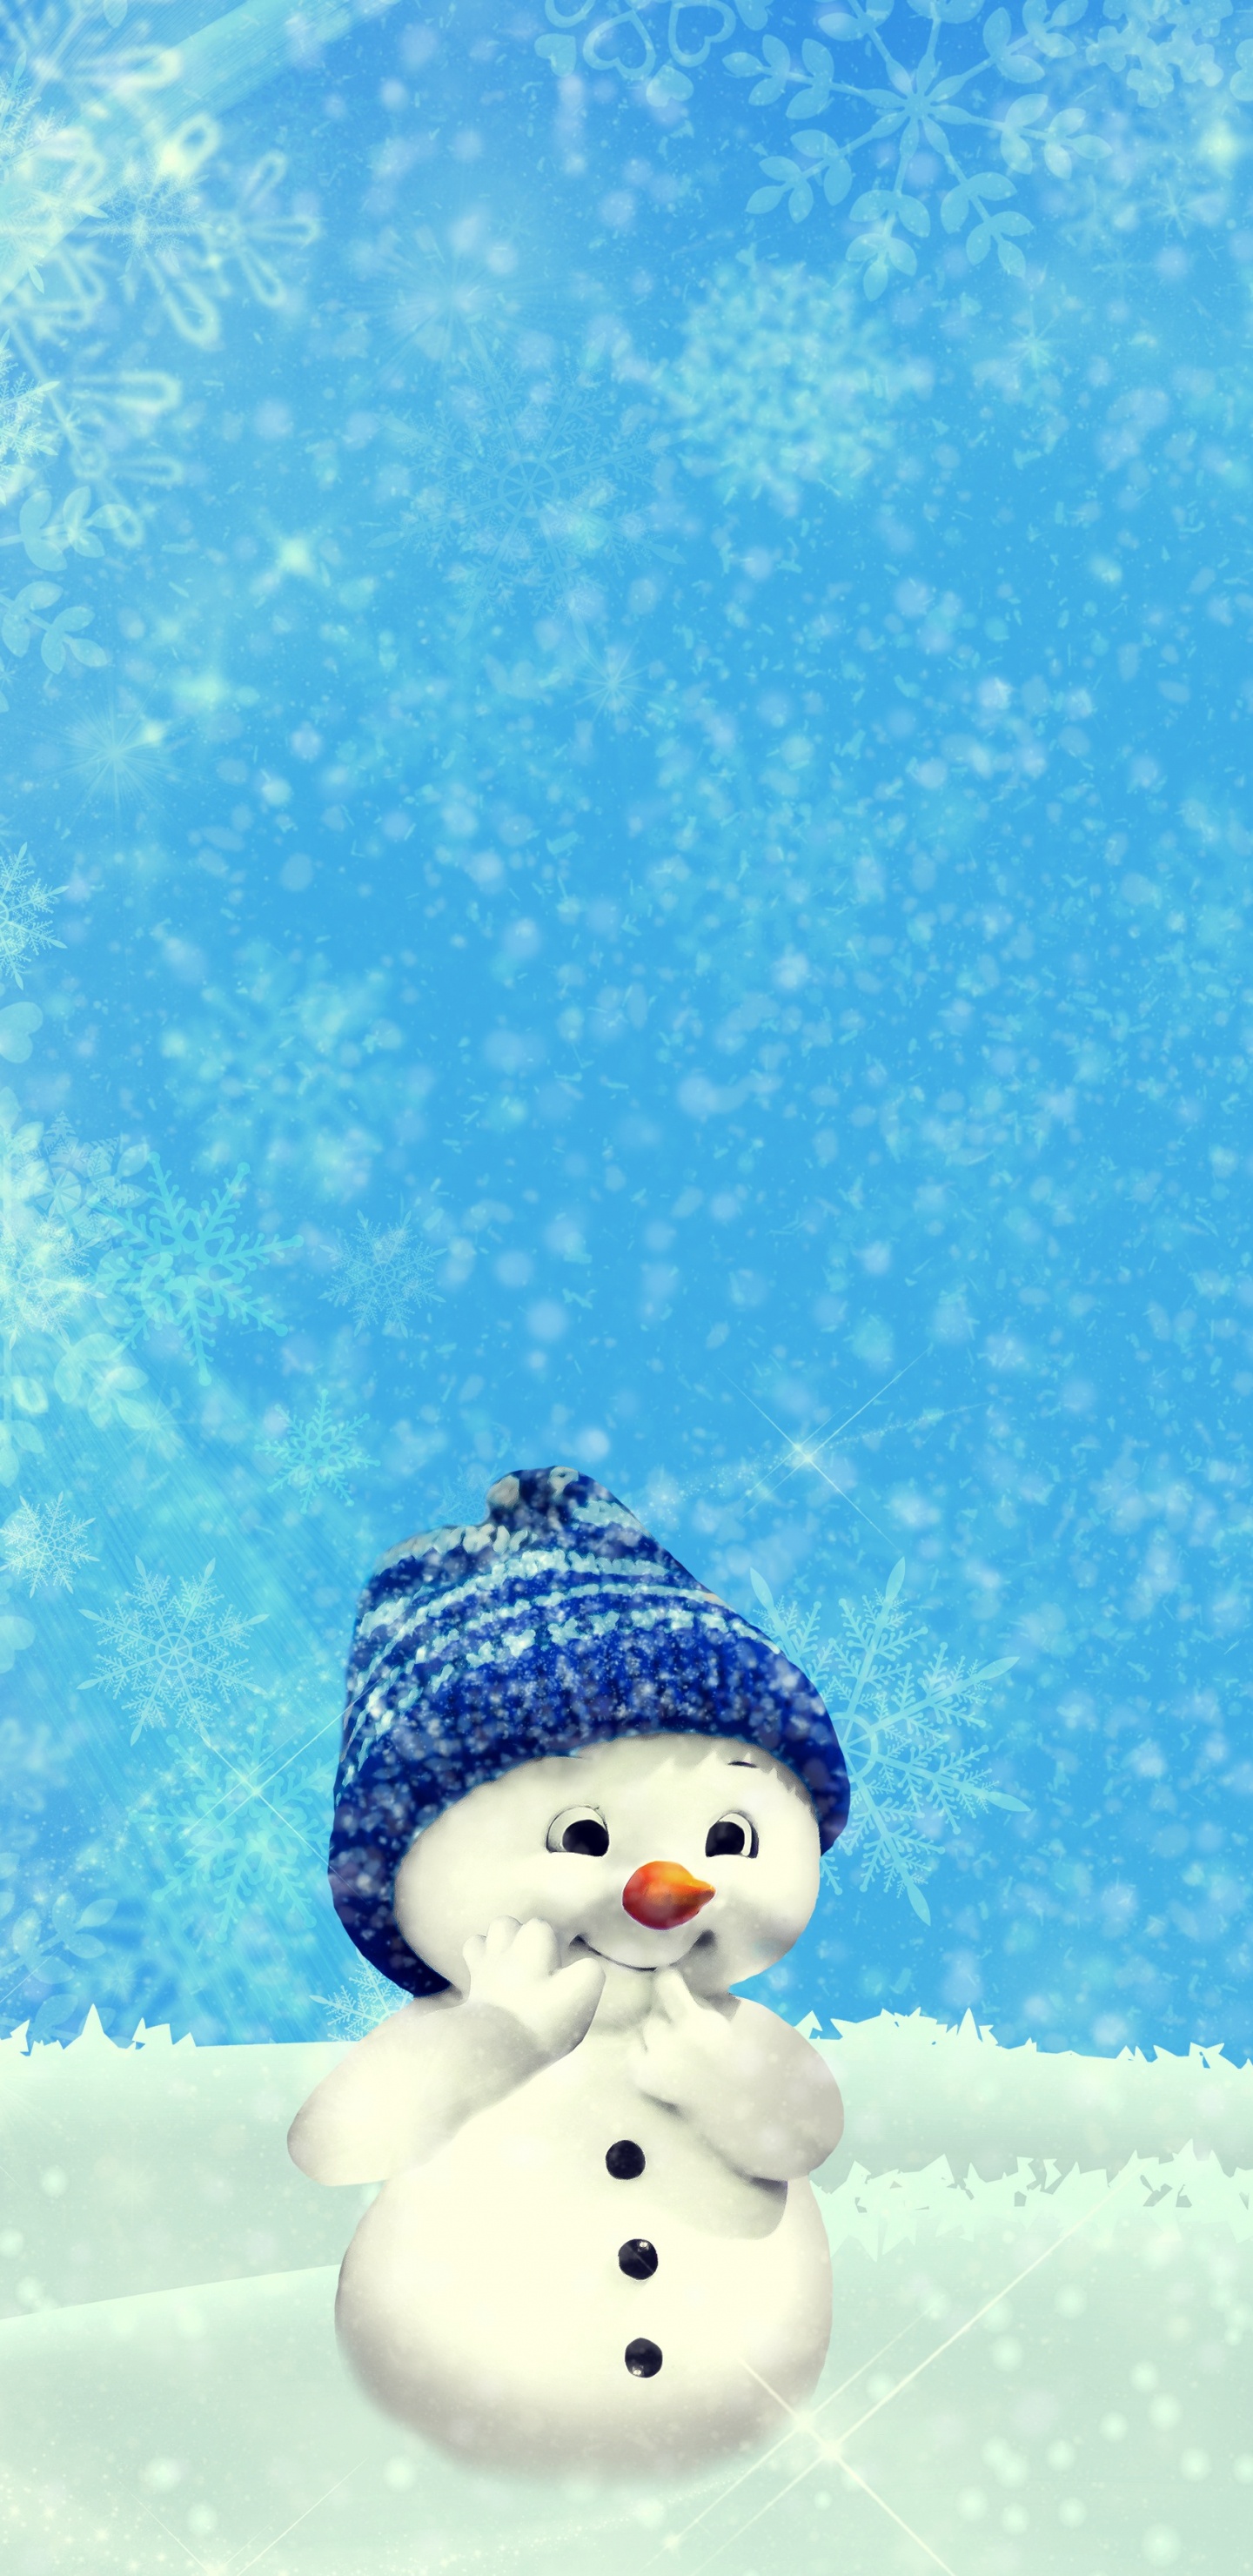 Snowman, Christmas Day, Snow, Winter, Freezing. Wallpaper in 1440x2960 Resolution